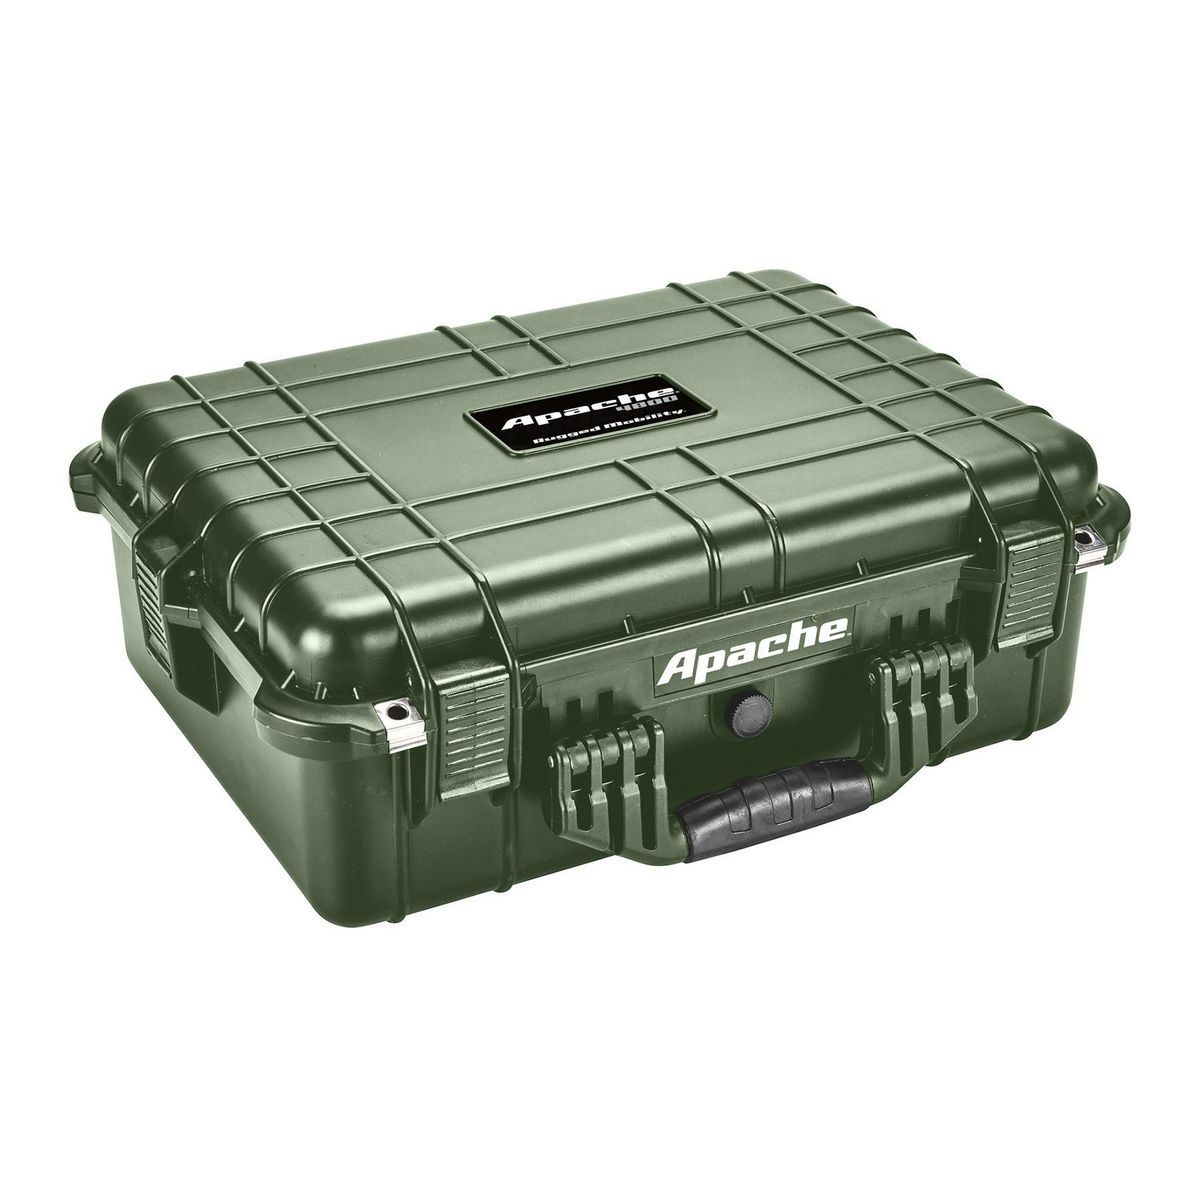 Yellow Apache 4800 Weatherproof Protective Case, X-Large, Watertight, dust-tight, impact resistant protective case